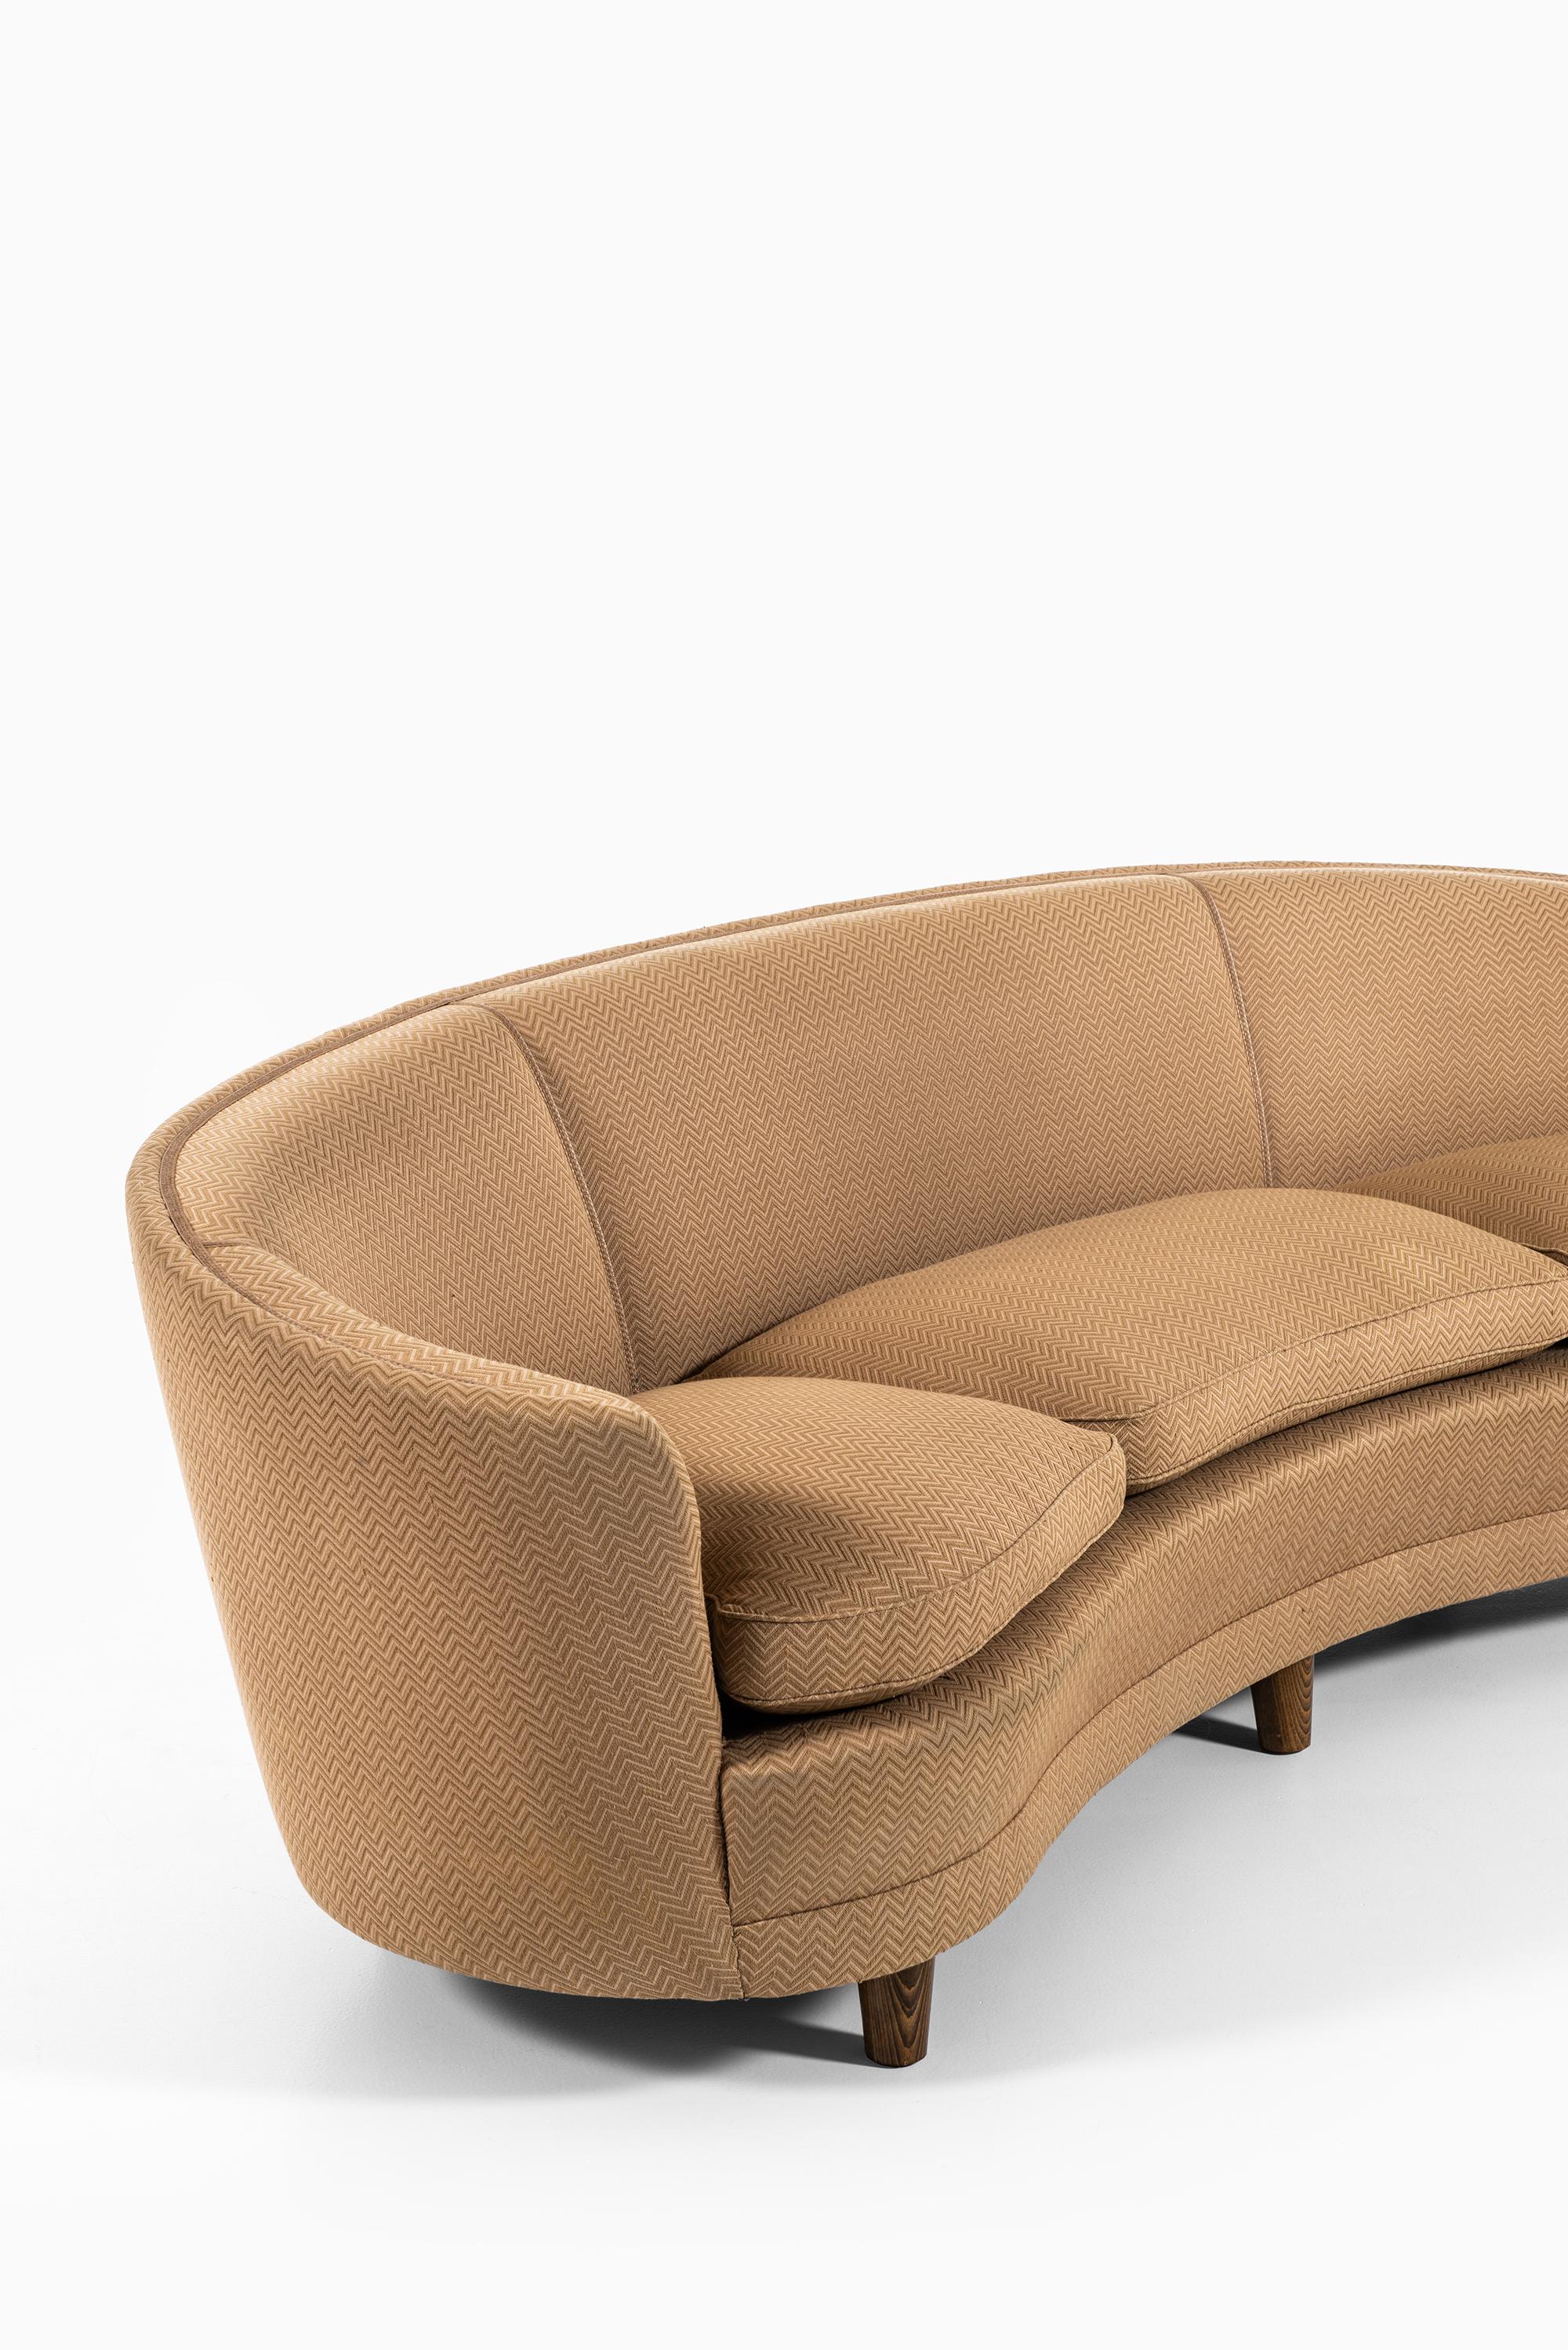 Fabric Otto Schulz Big Curved Sofa Produced by Boet in Sweden